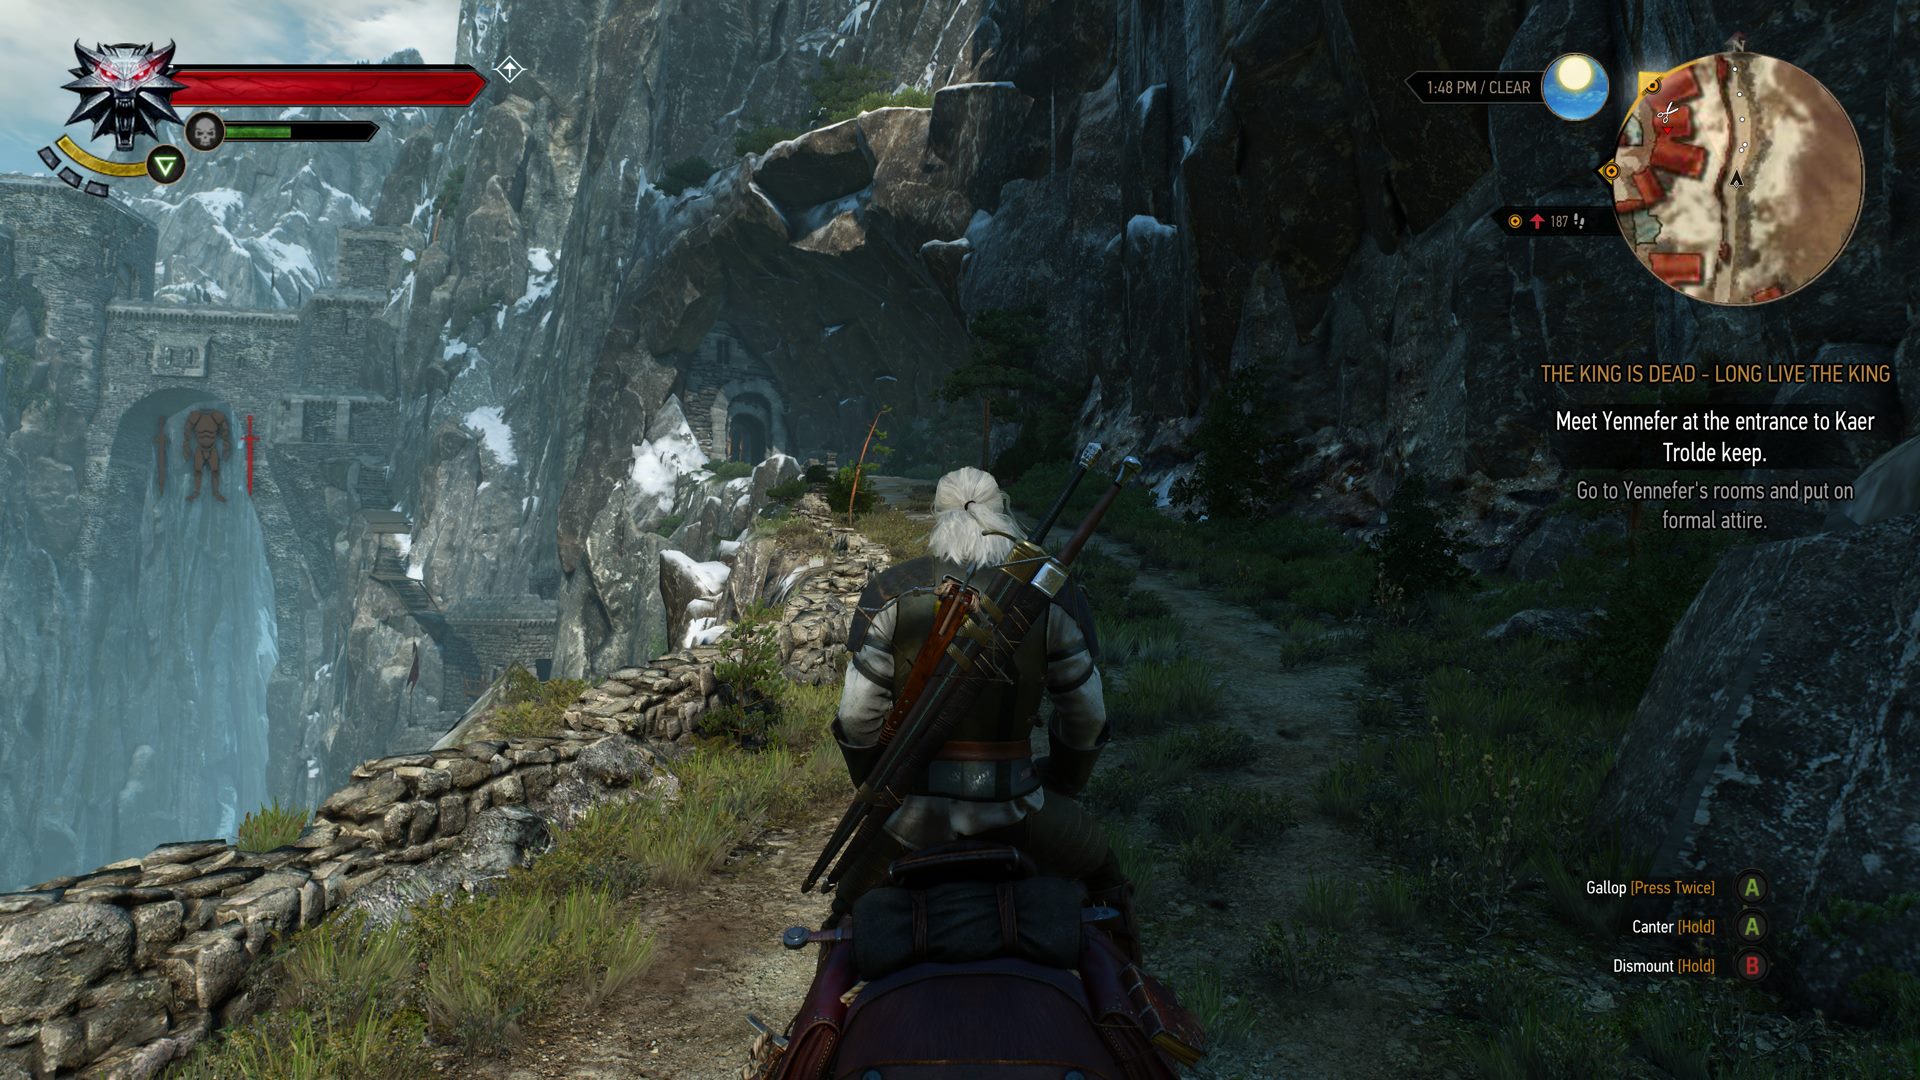 The Witcher 3 Dragon Age And The Question Of Length